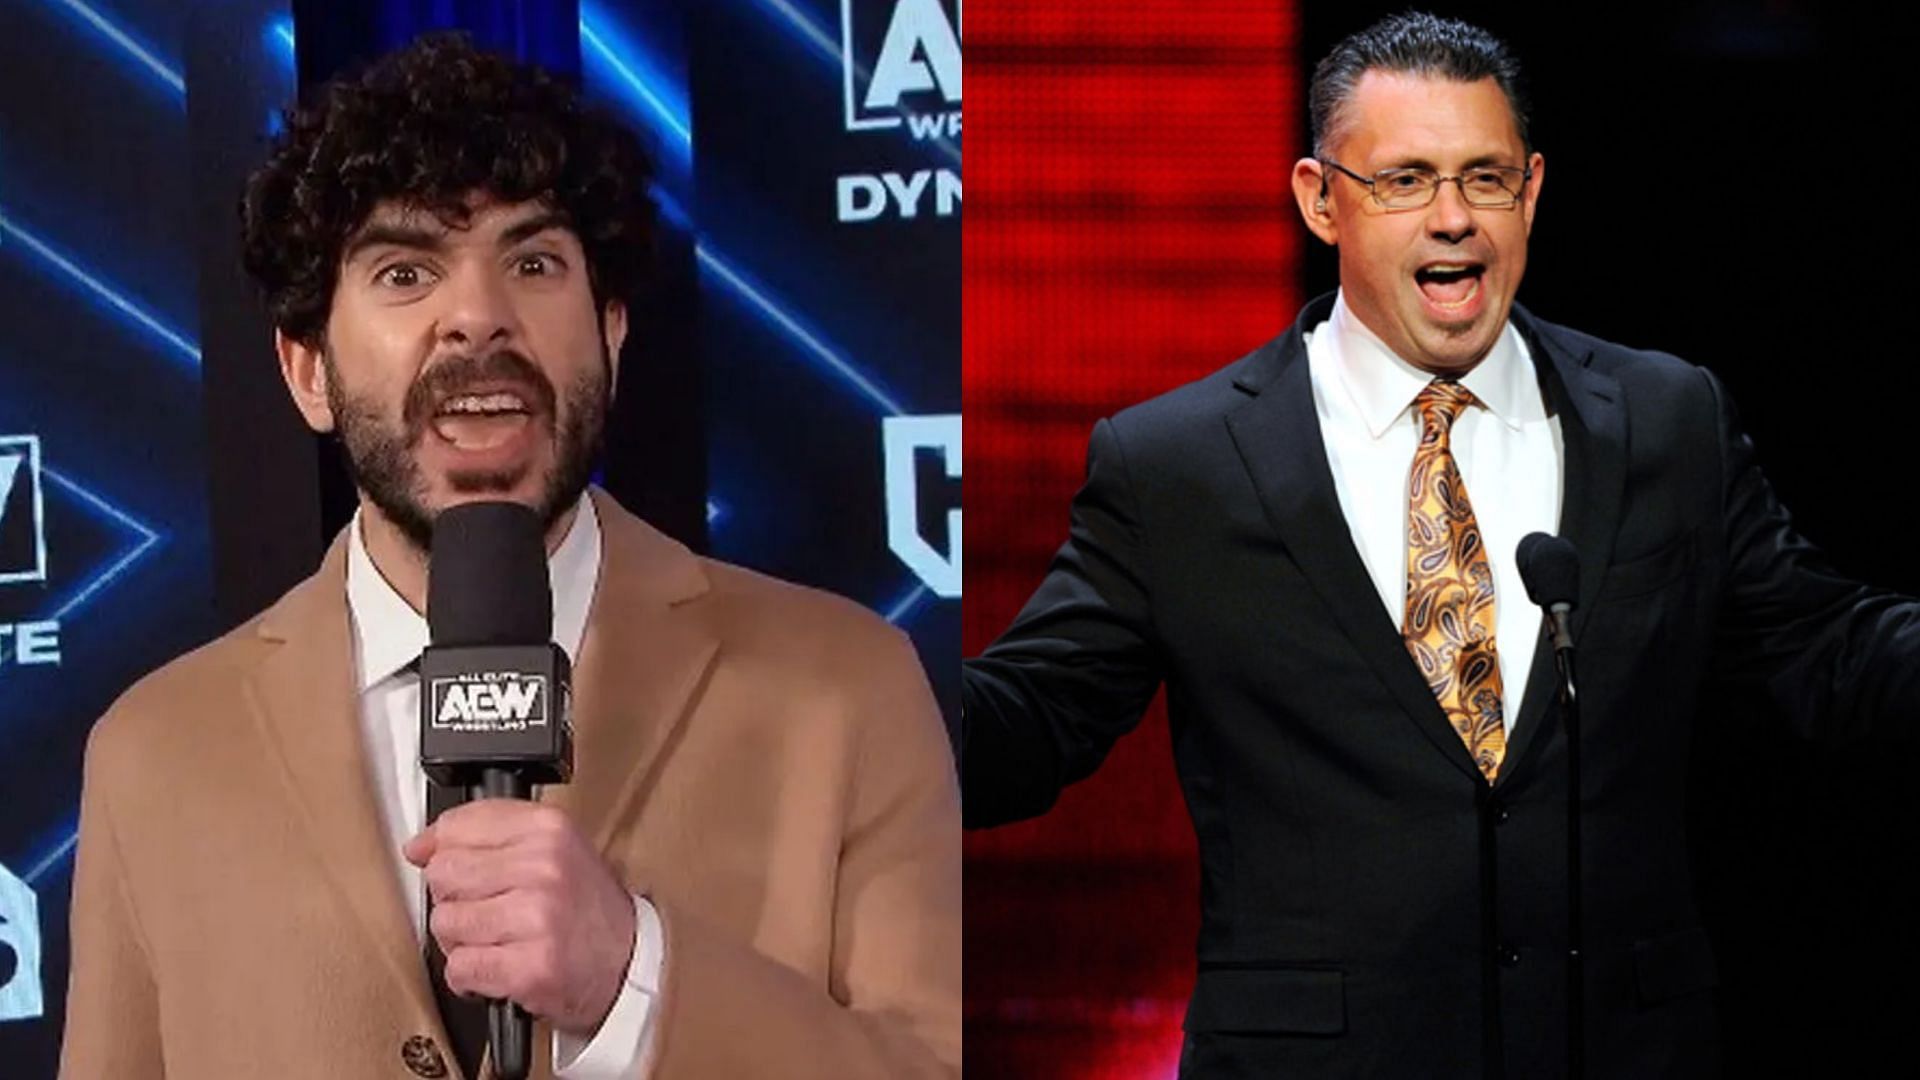 Will AEW ever fire back at WWE for these shots?